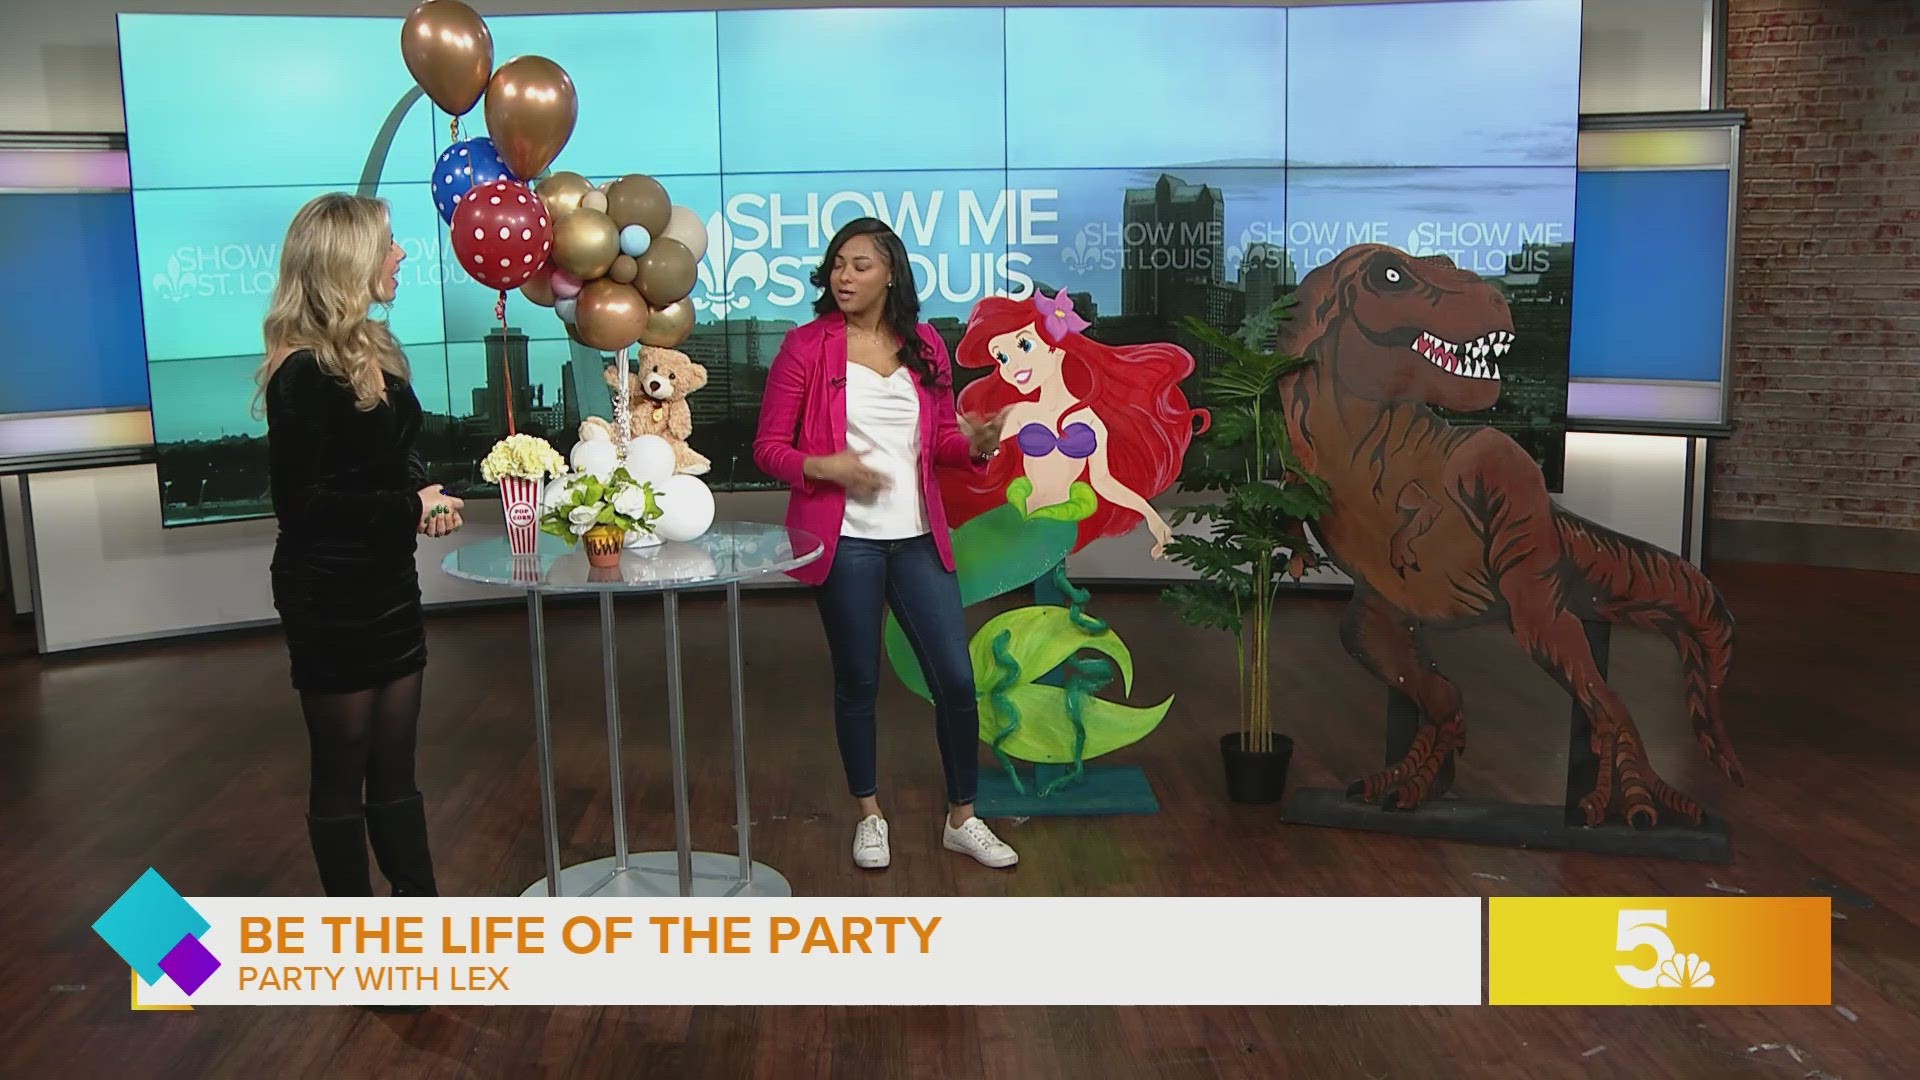 Wednesday morning, Mary Caltrider speaks with a local event designer and balloon-styling business owner, Alexis Evans.